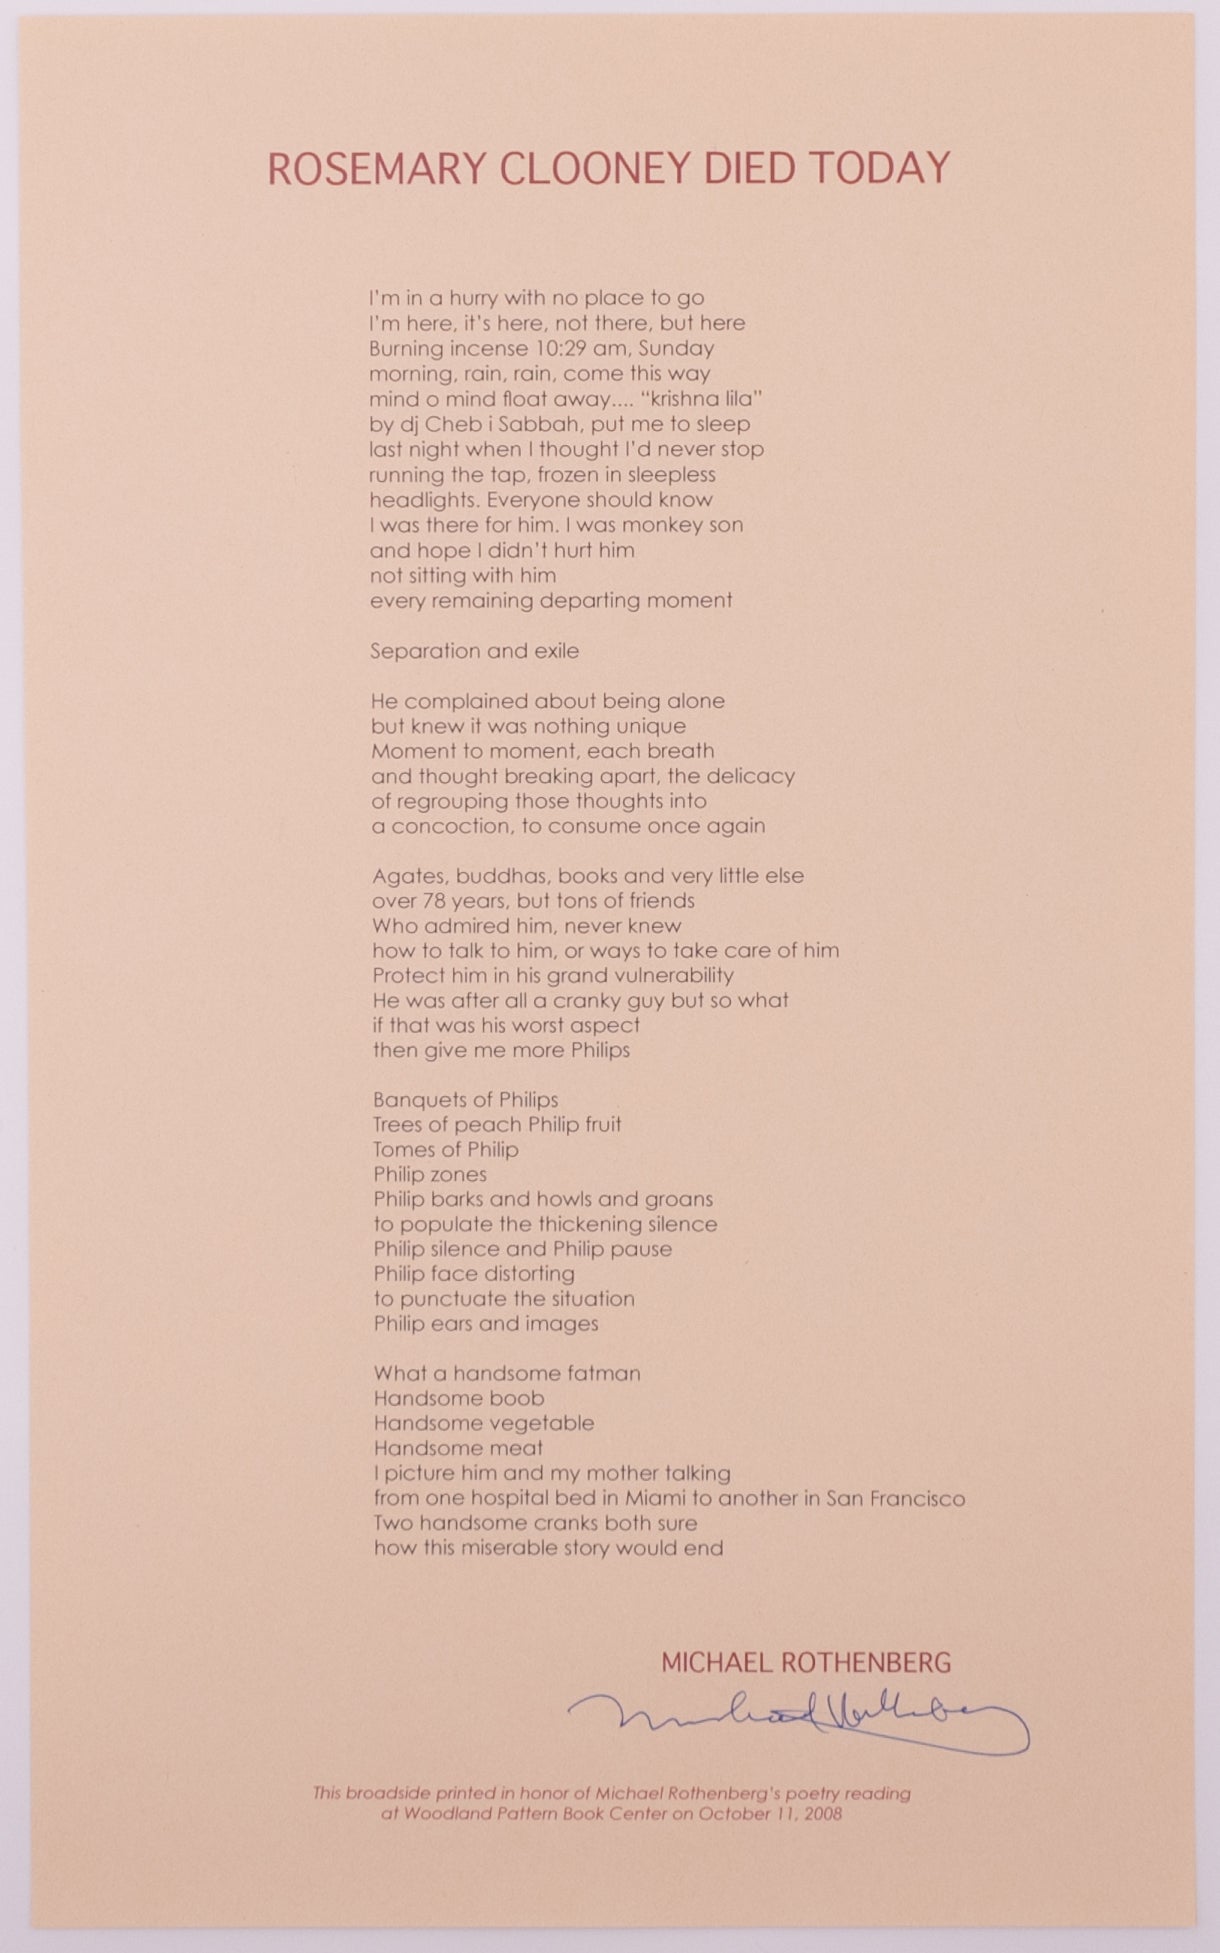 Broadside for Michael Rothenberg. The poem on it is called Rosemary Clooney Died Today. On cream paper in red and black text.